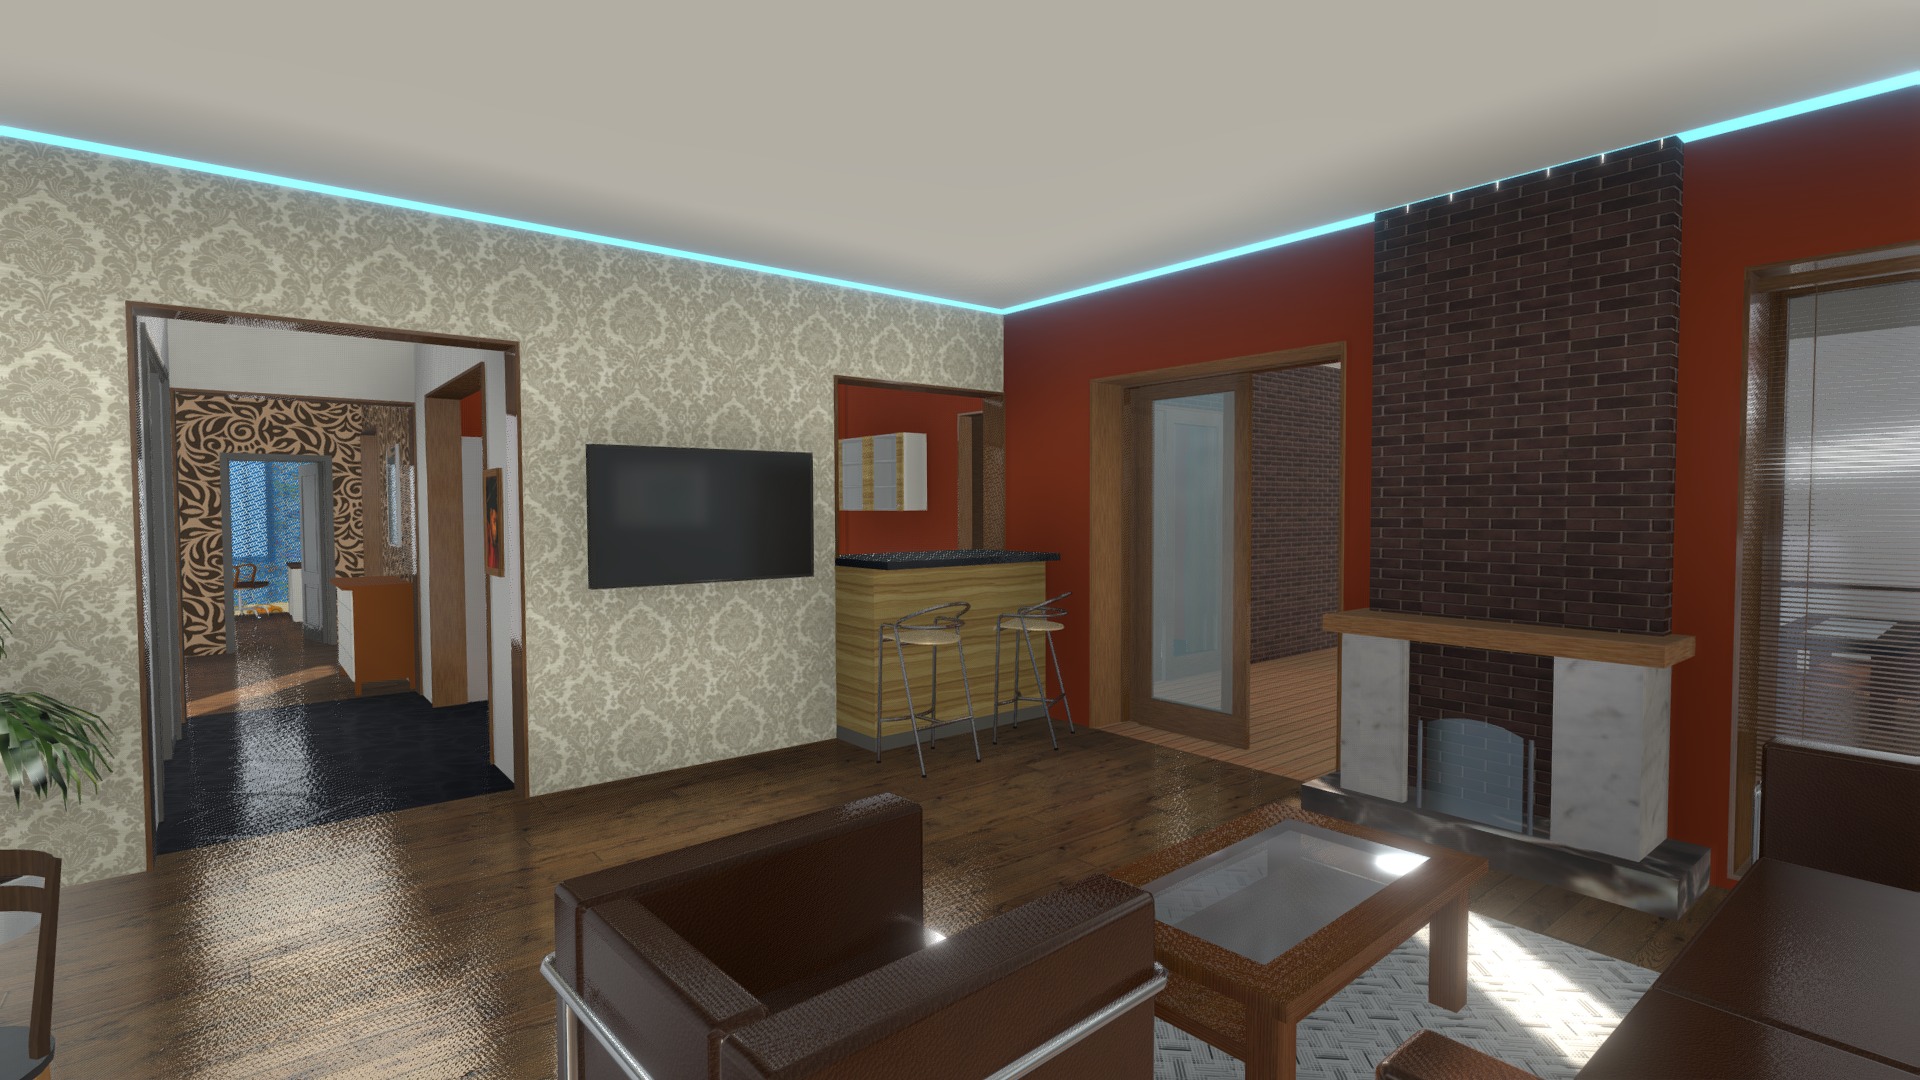 3D model apartment floor plan VR model with furniture - This is a 3D model of the apartment floor plan VR model with furniture. The 3D model is about a living room with a fireplace.